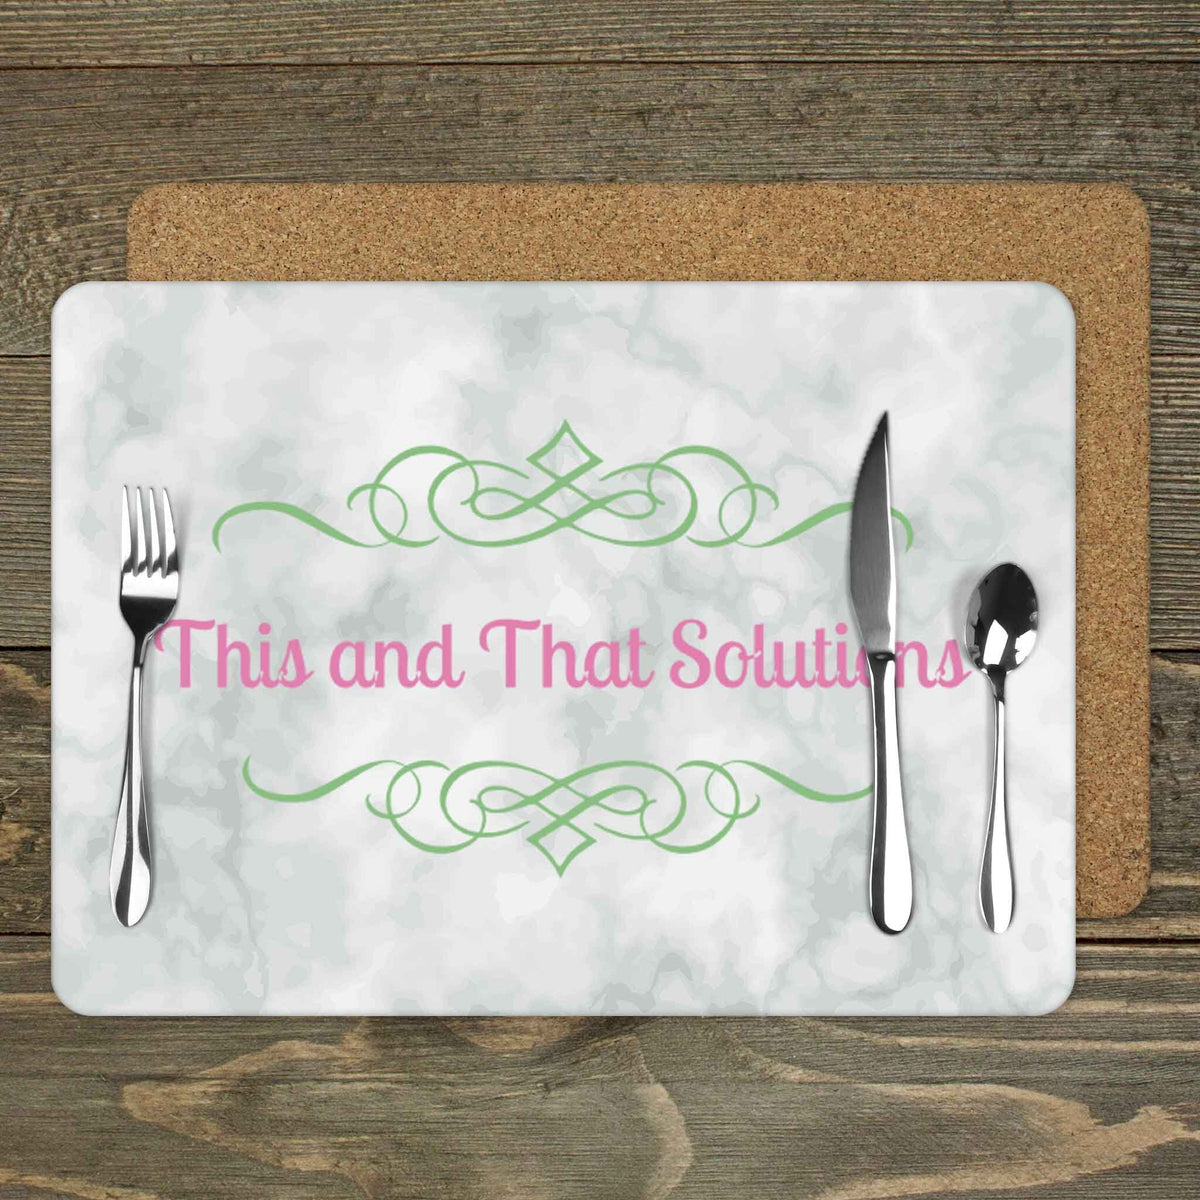 Custom Placemats | Personalized Dining and Serving | Company Logo